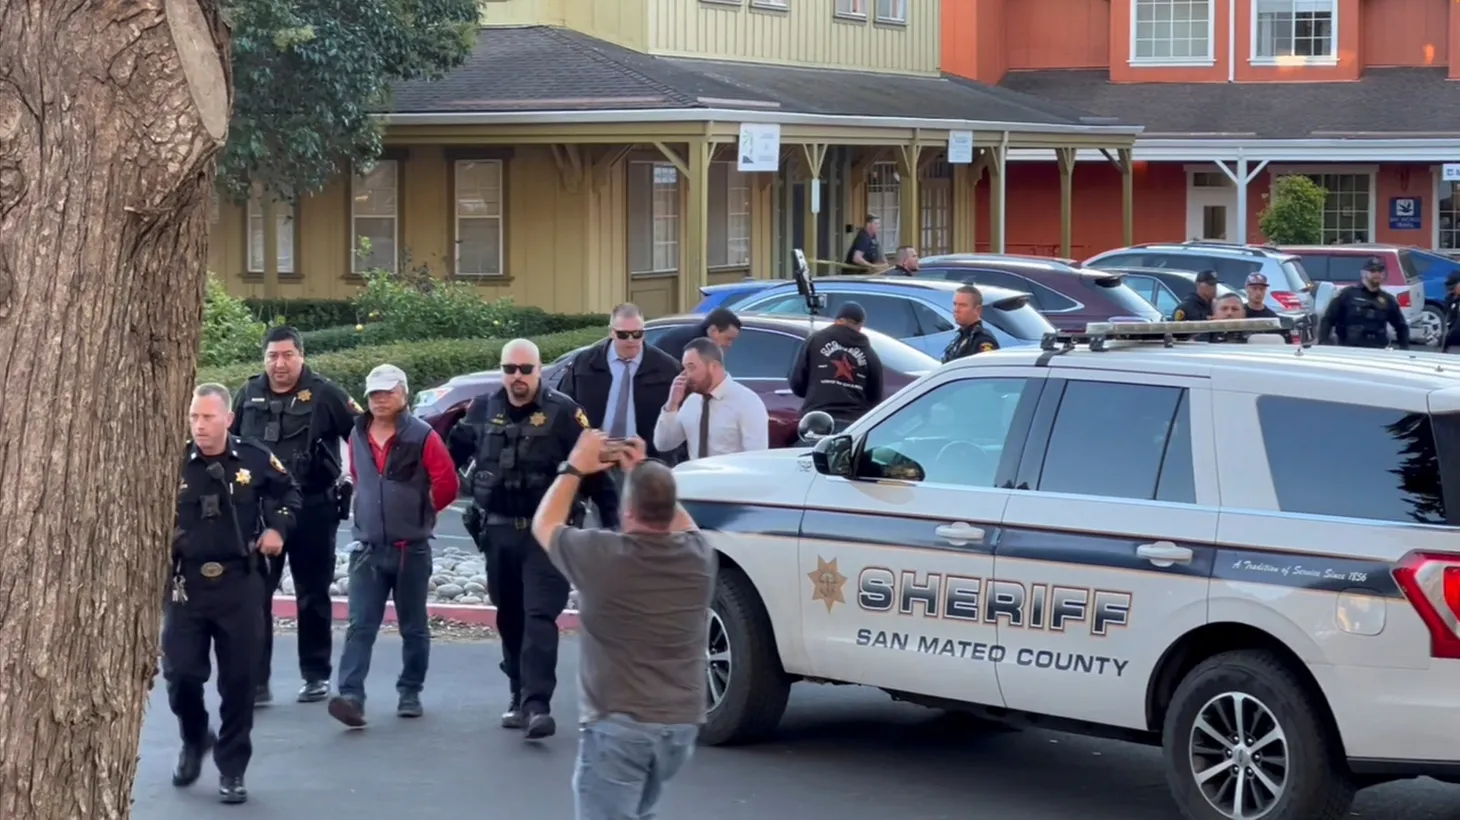 Police officers detain a man, believed to be the Half Moon Bay mass shooting suspect, in Half Moon Bay, California, U.S., January 23, 2023, in this screengrab taken from a social media video.